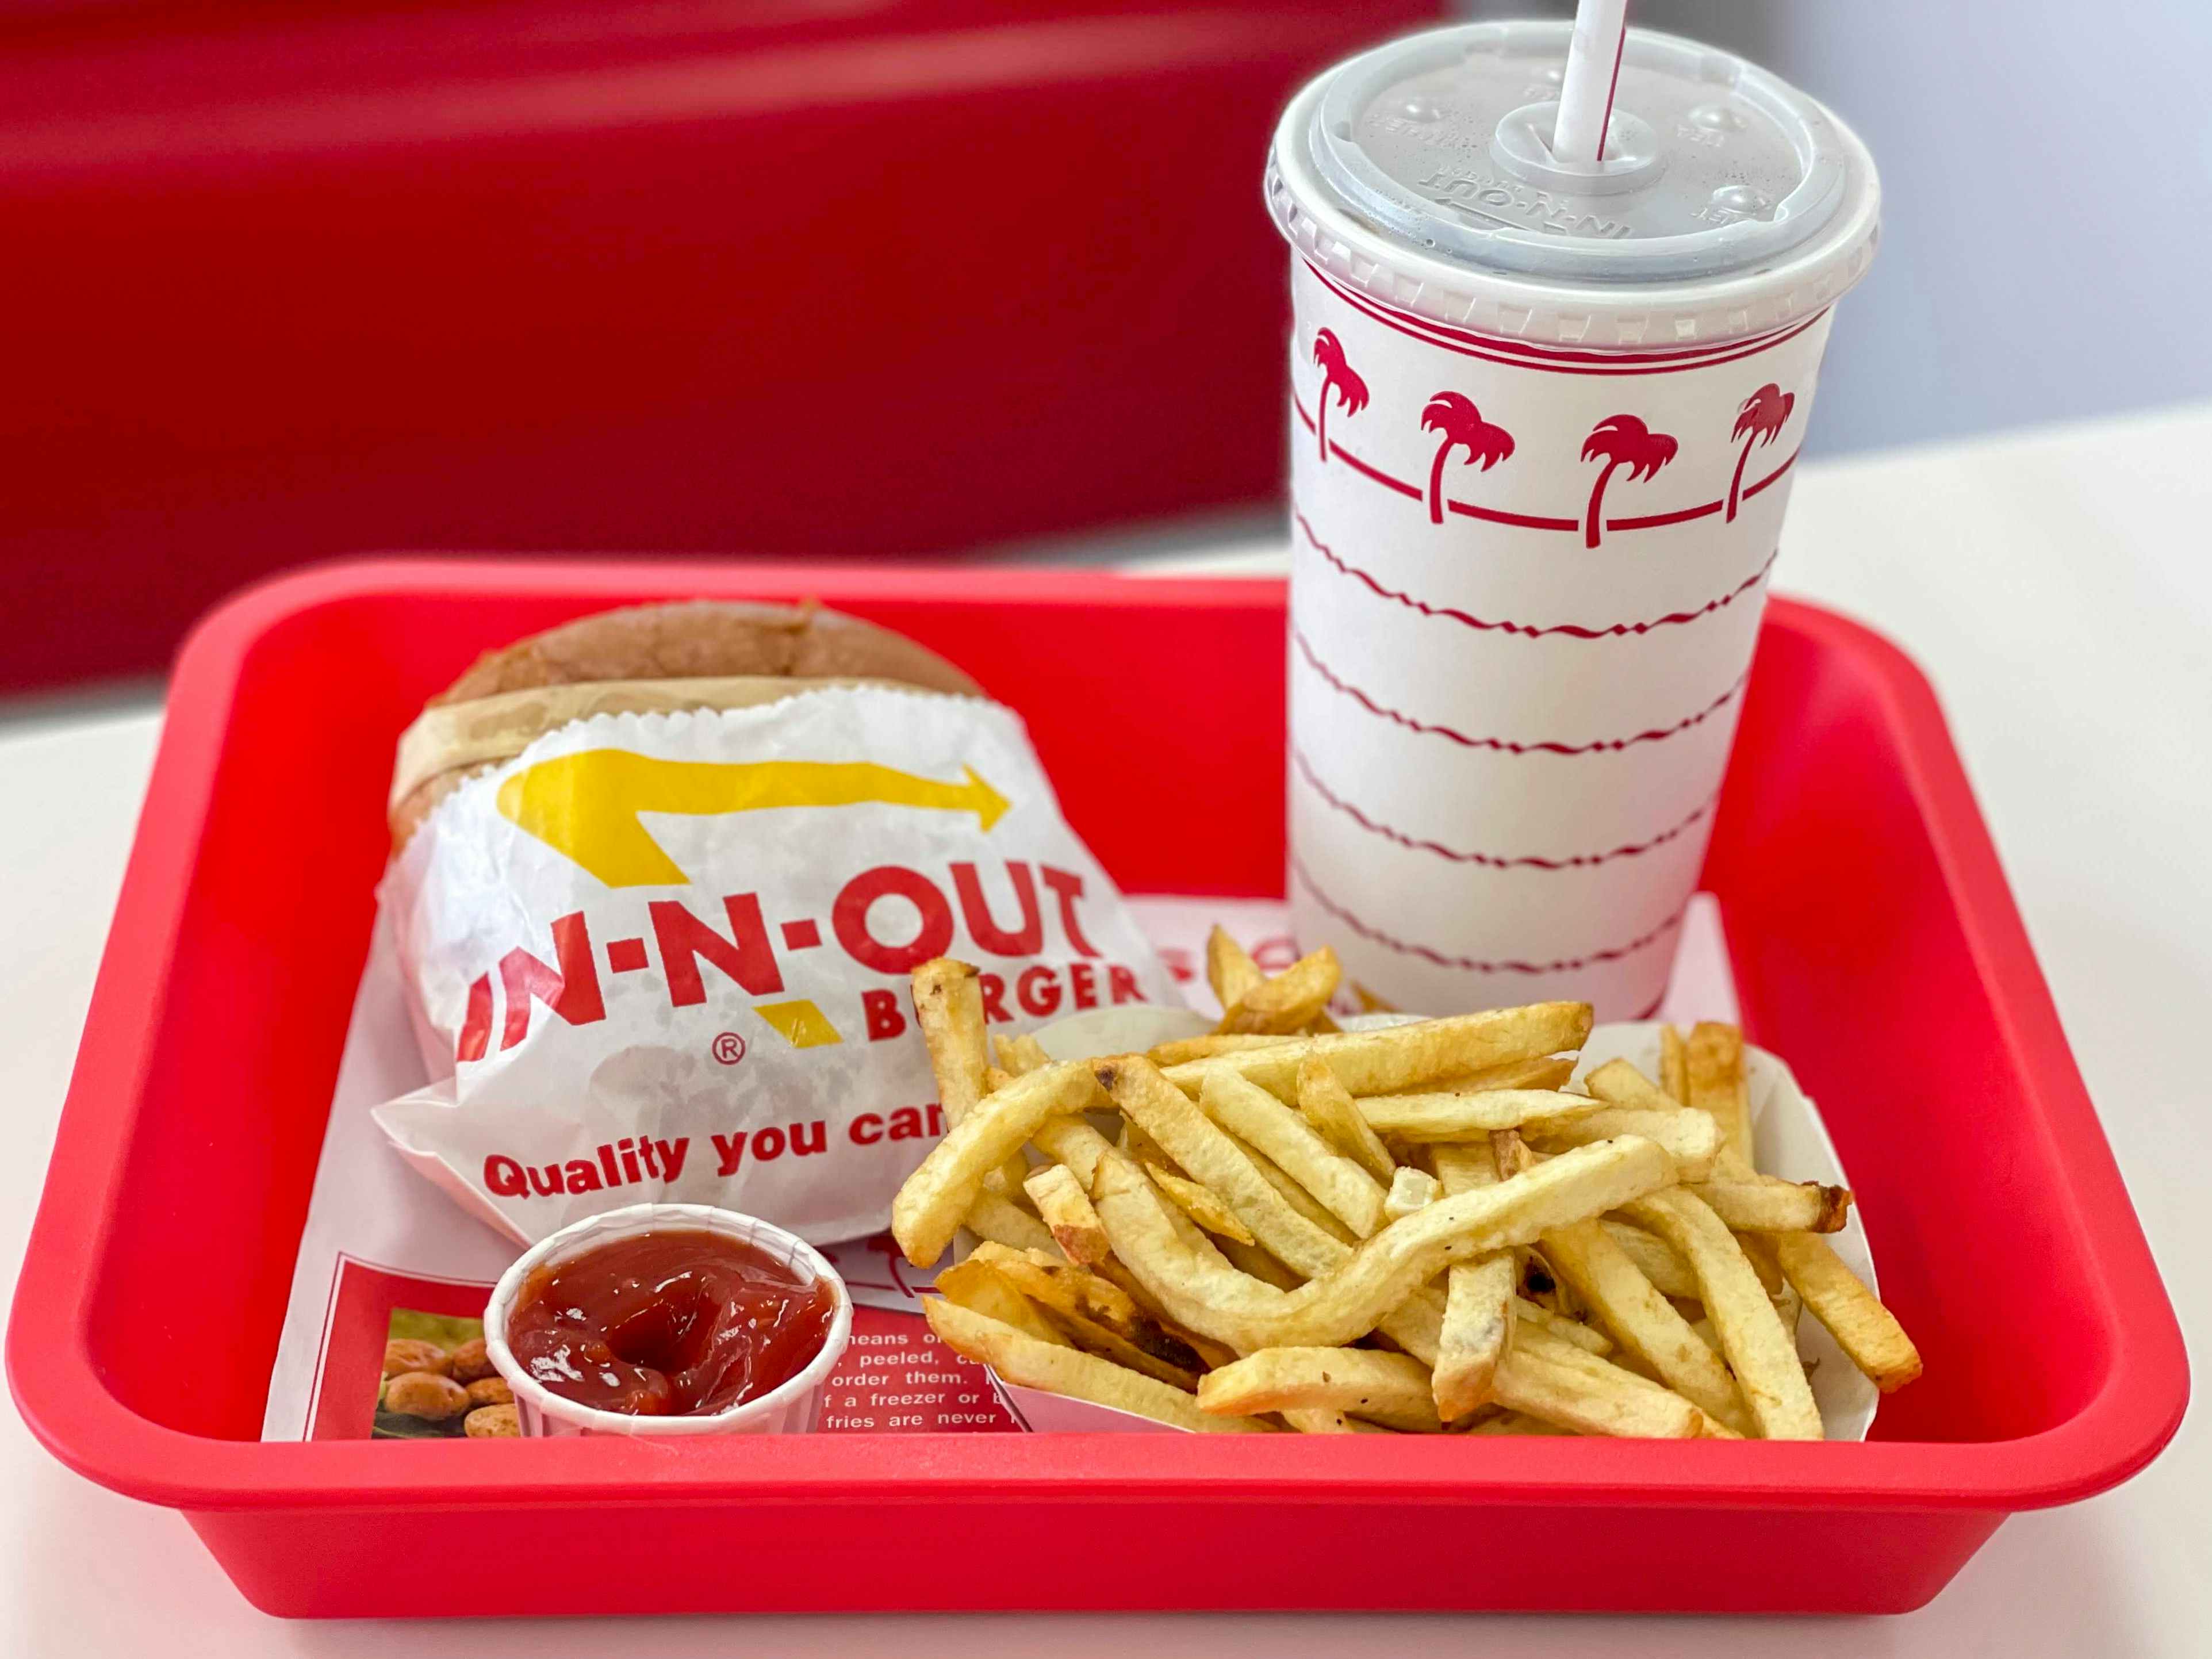 A combo meal with burger, drink, and fries on a red plastic tray at In-N-Out.